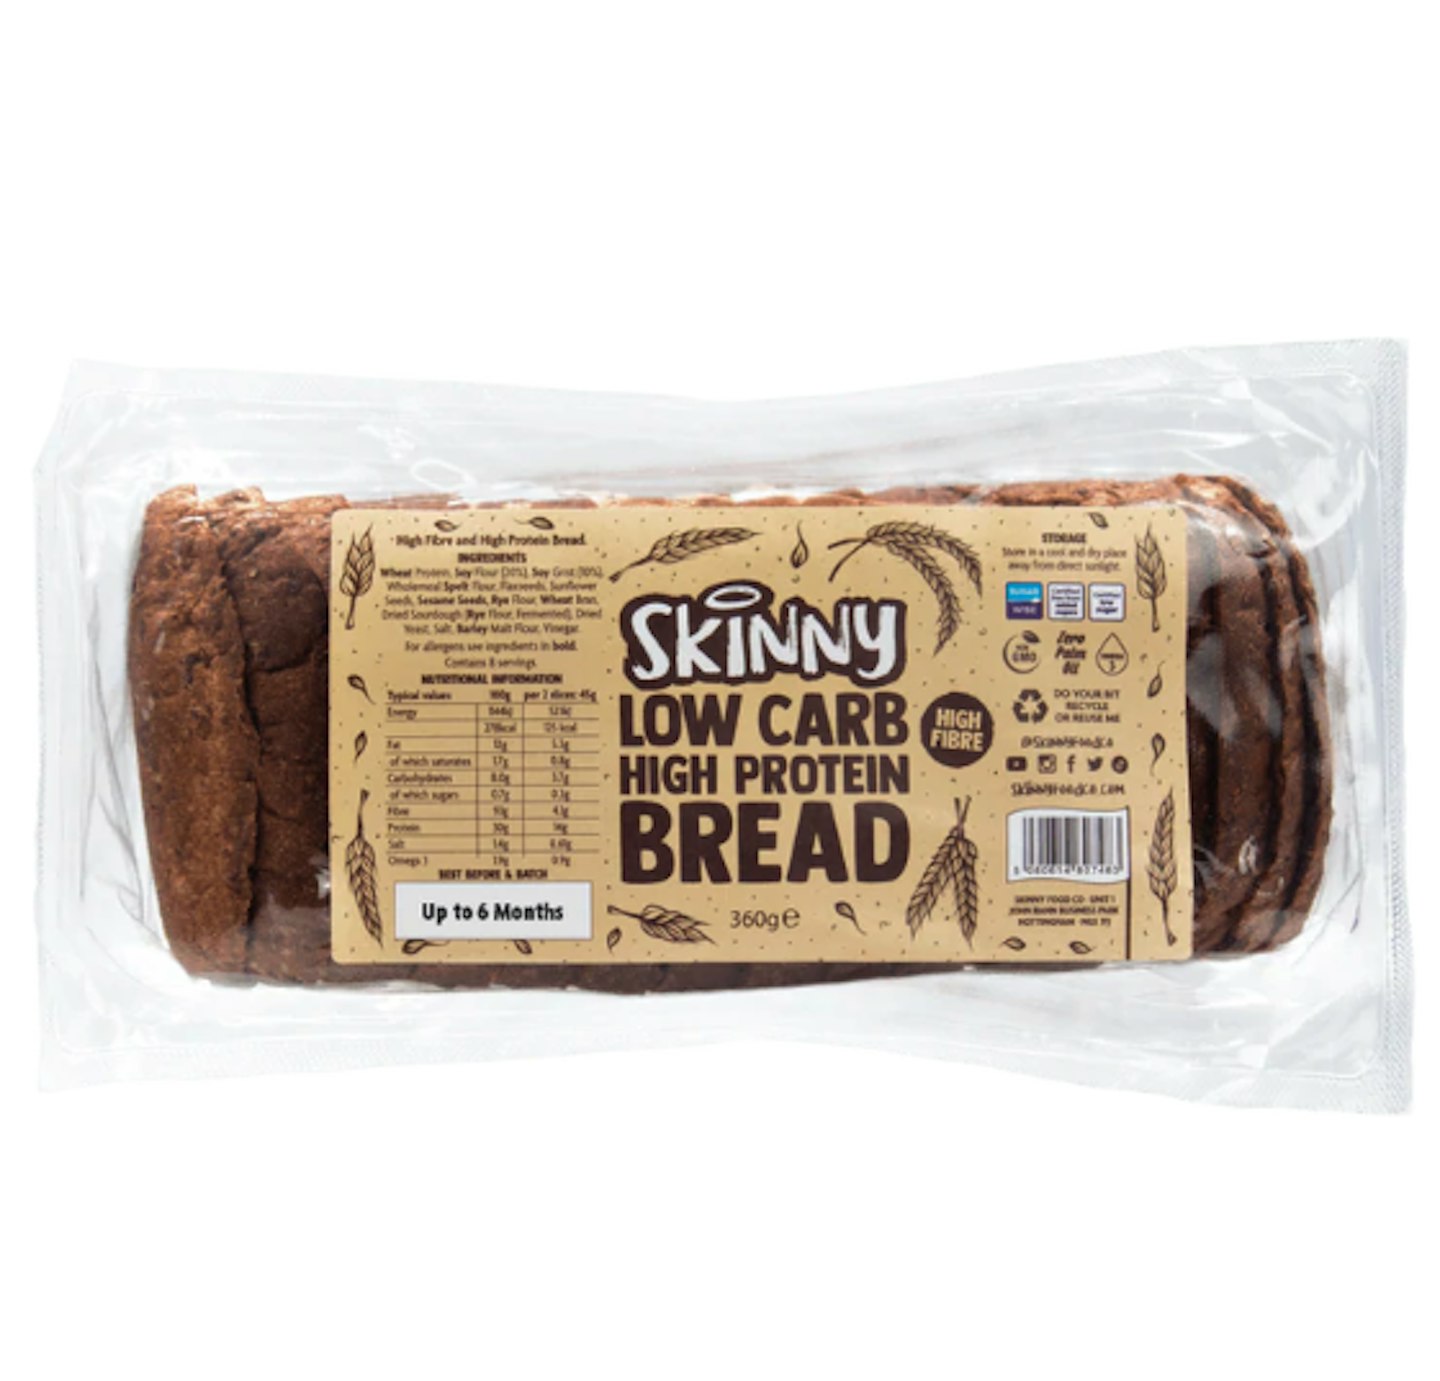 Skinny Low Carb High Protein Bread